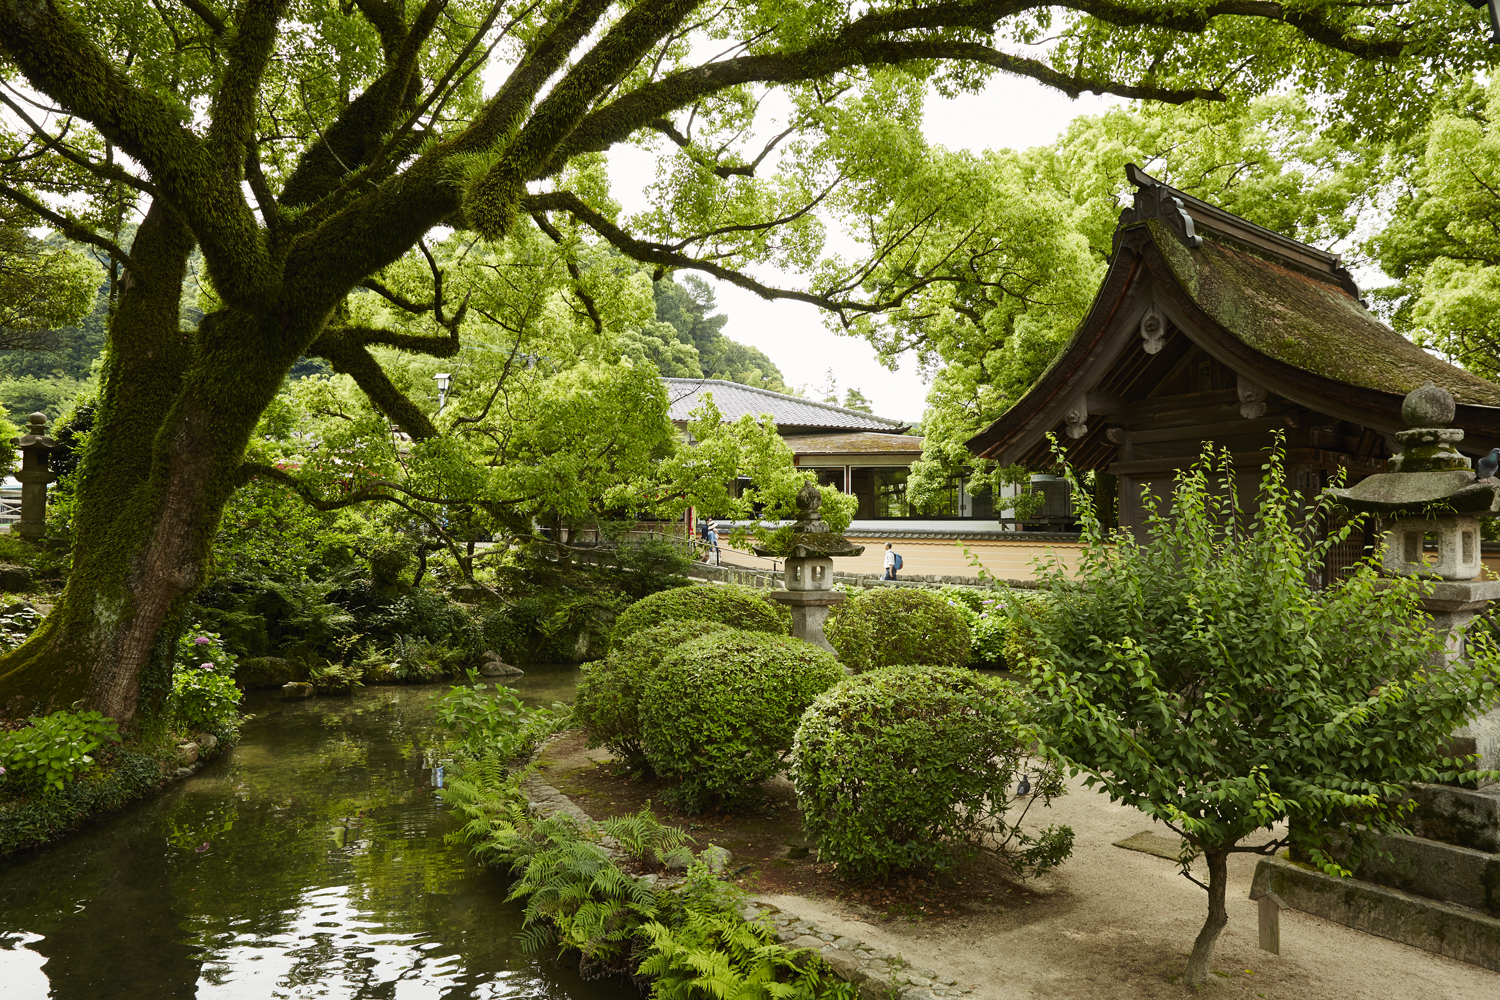 Princess Cruises offers an array of itineraries in Japan.